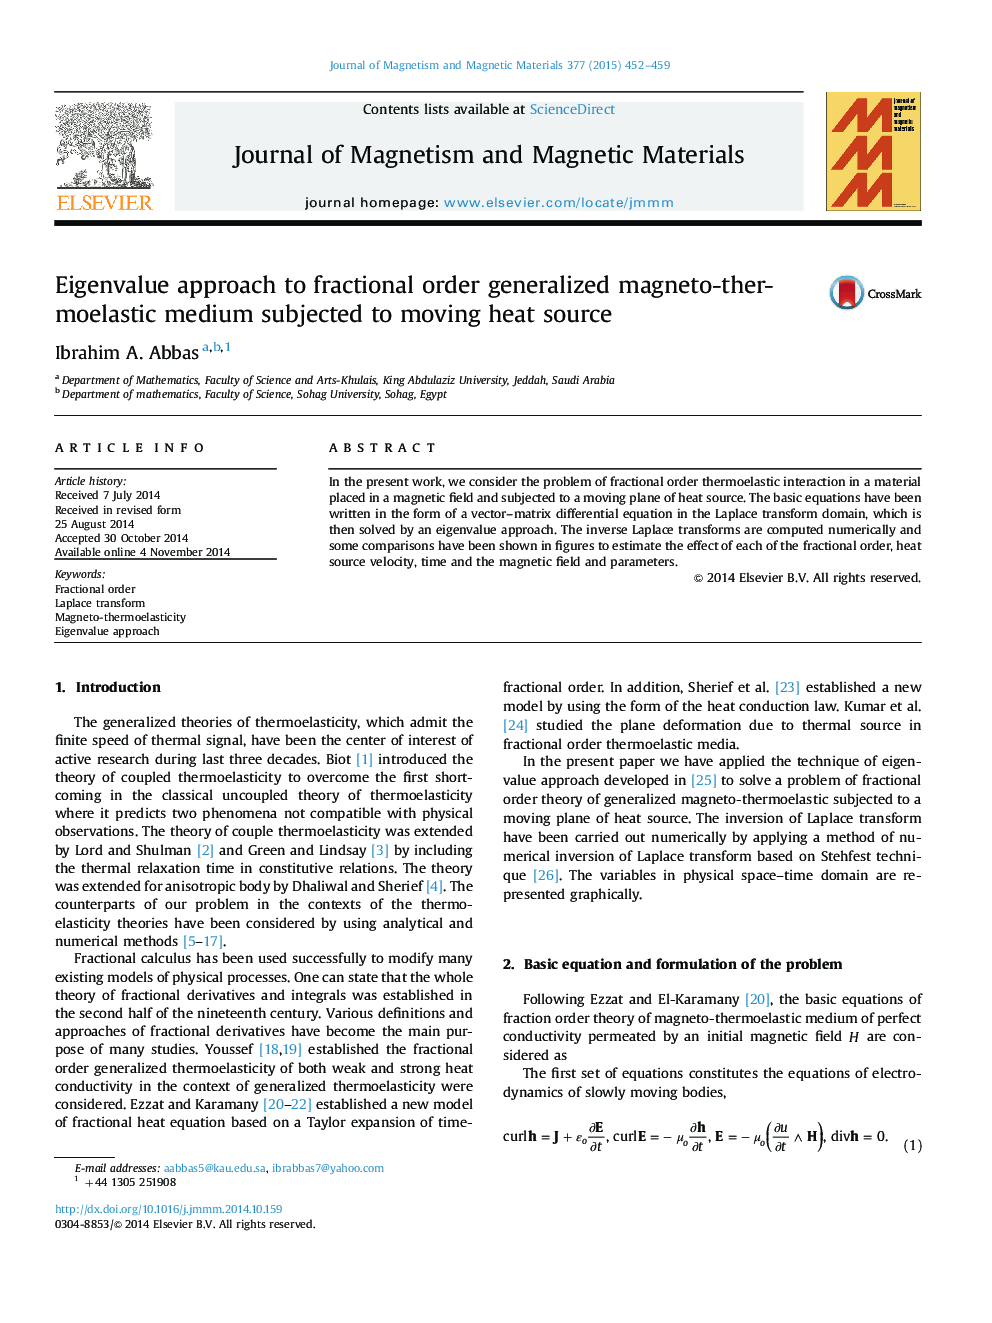 Eigenvalue approach to fractional order generalized magneto-thermoelastic medium subjected to moving heat source